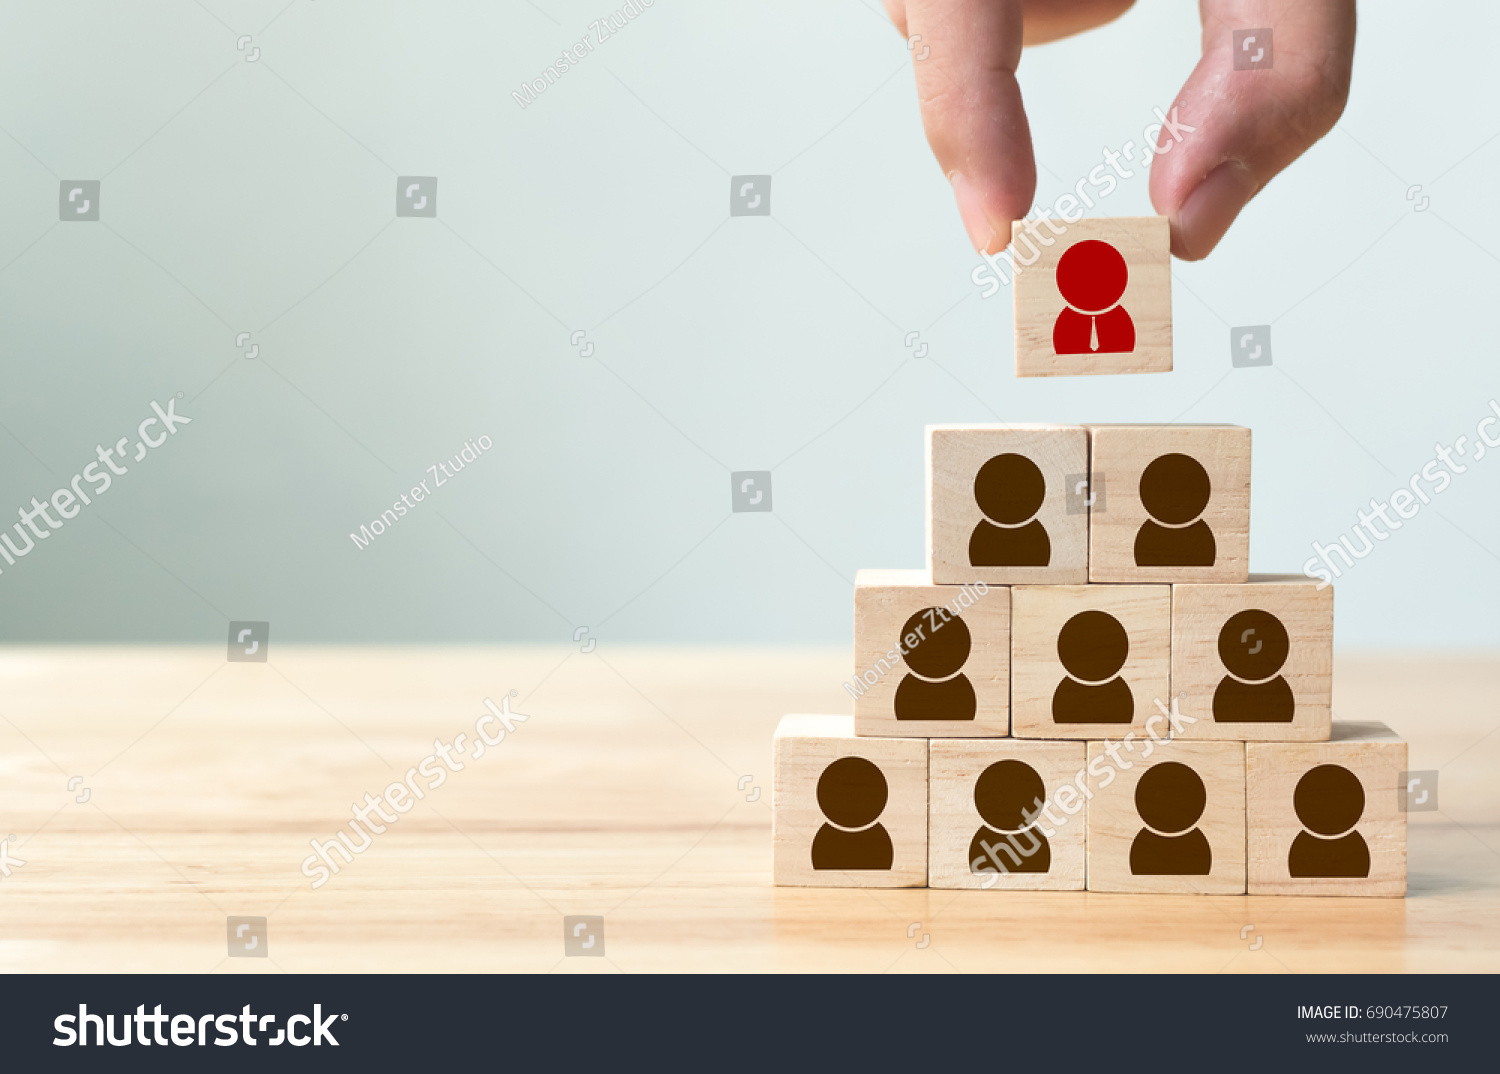 Human resource management and recruitment business concept, Hand putting wood cube block on top pyramid, Copy space #690475807